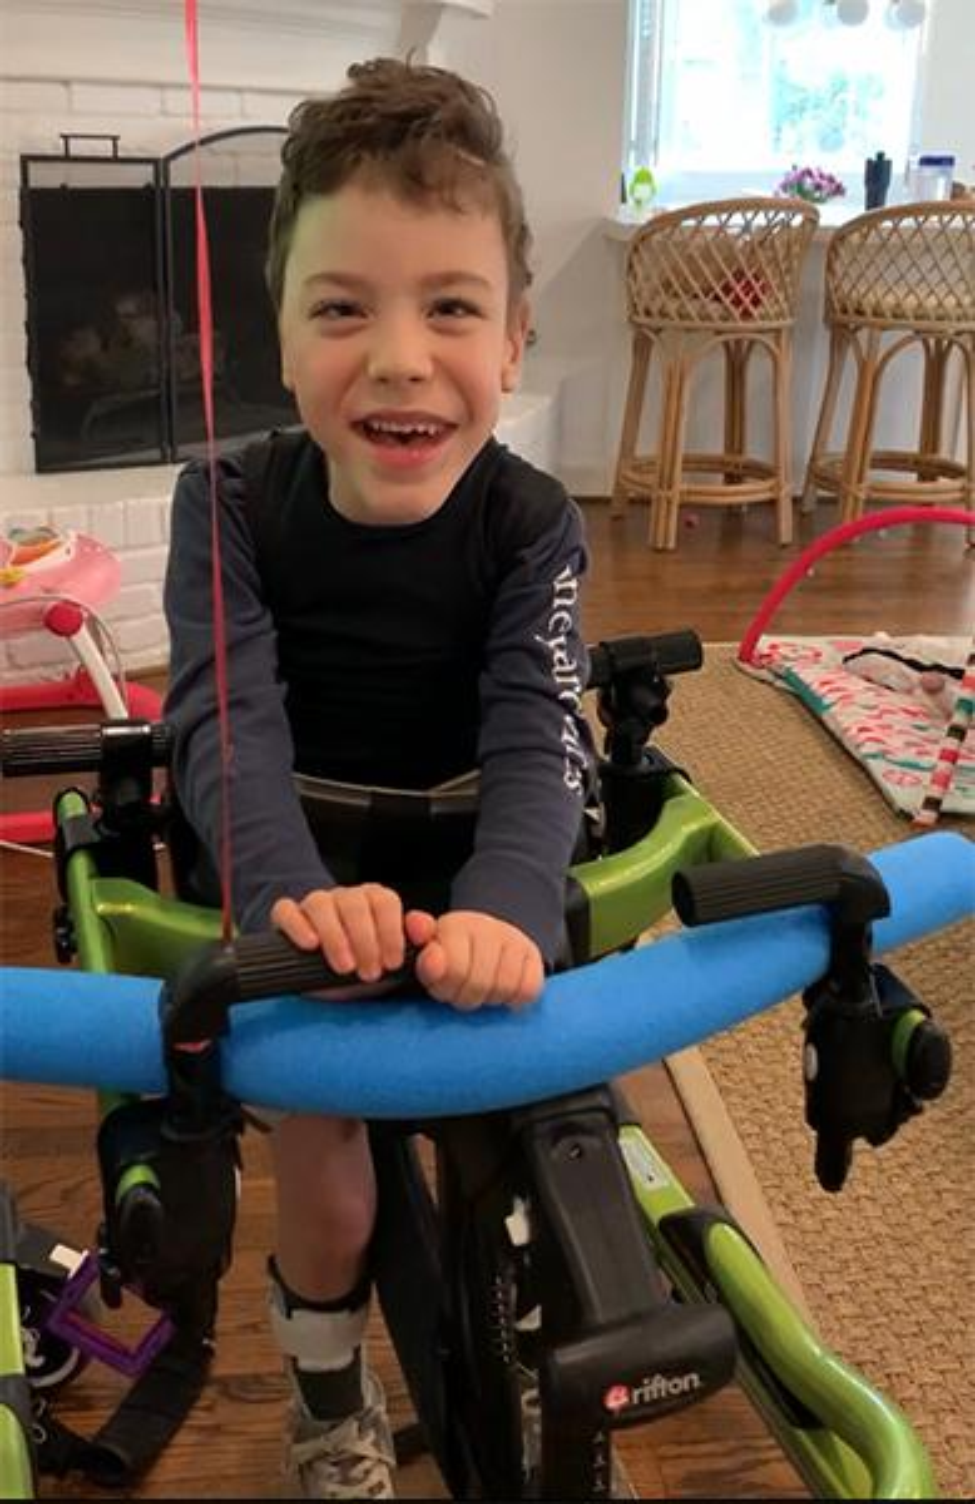 Photo of Robert Ryan who can now take steps using a gait trainer as part of his physical therapy. (Photo courtesy of Laura Ryan)